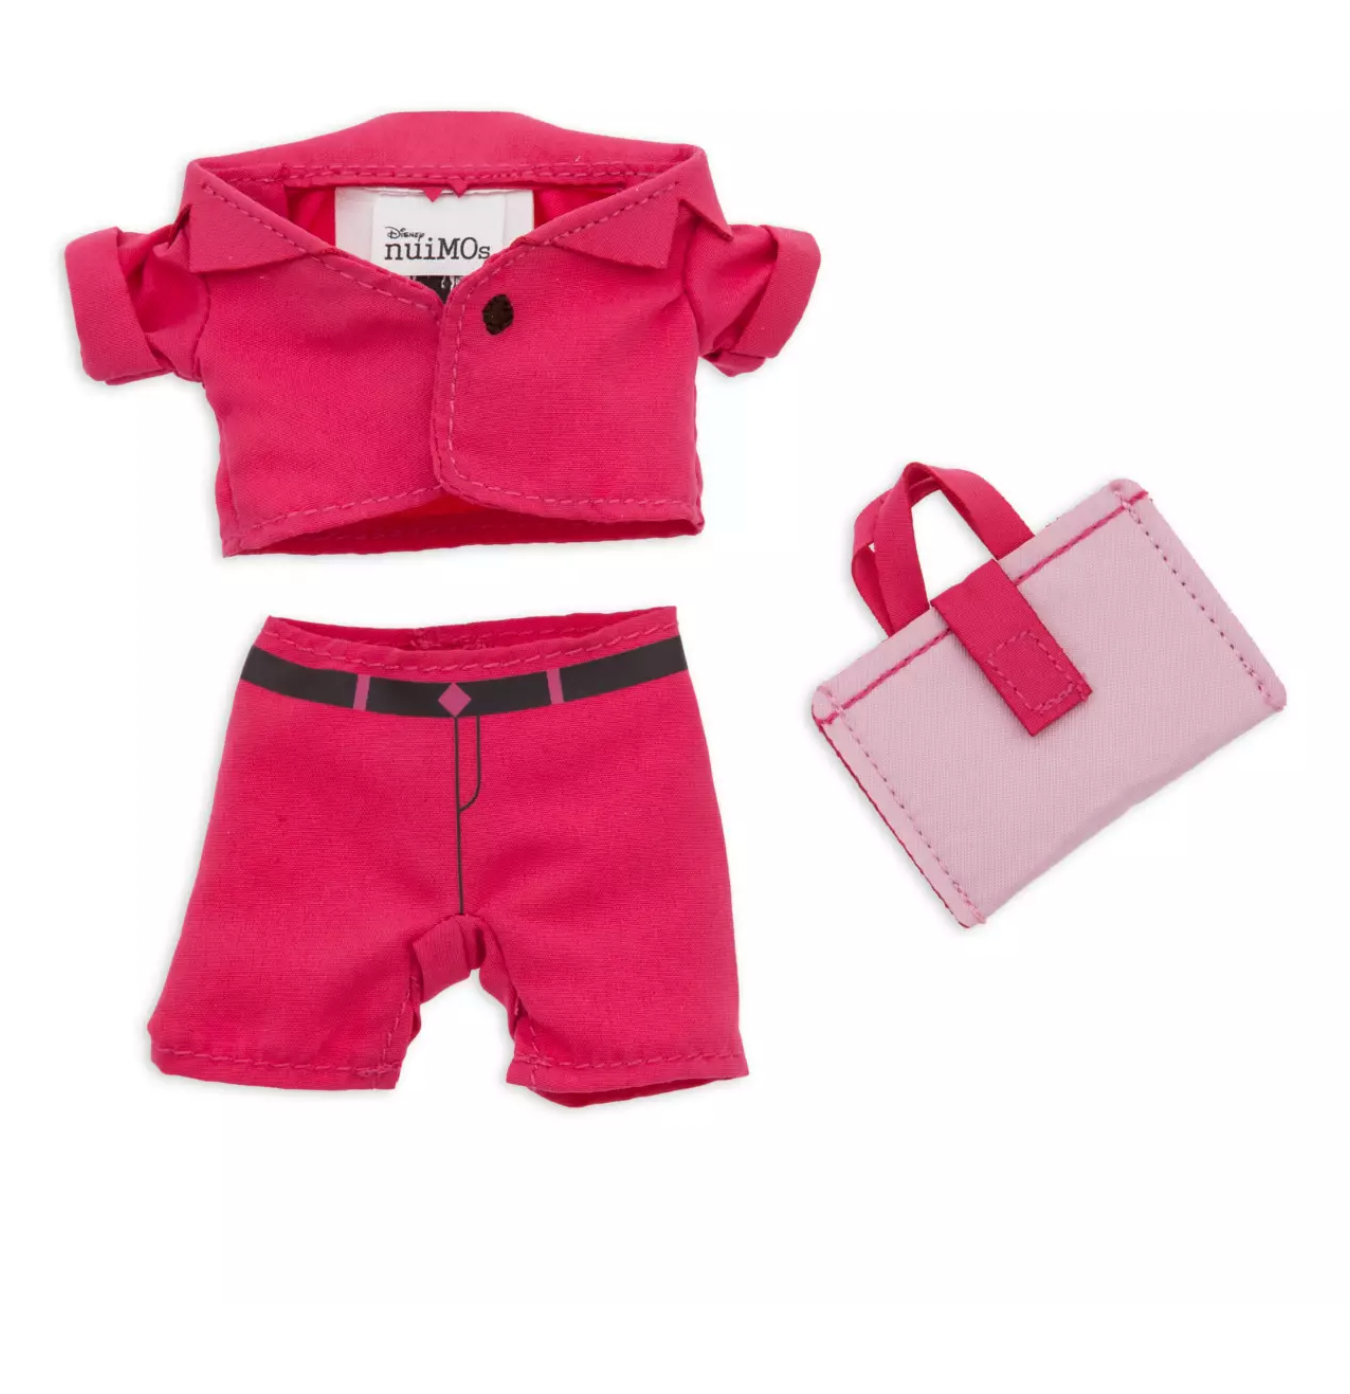 Disney NuiMOs Outfit Pink Power Suit with Laptop Bag New with Card